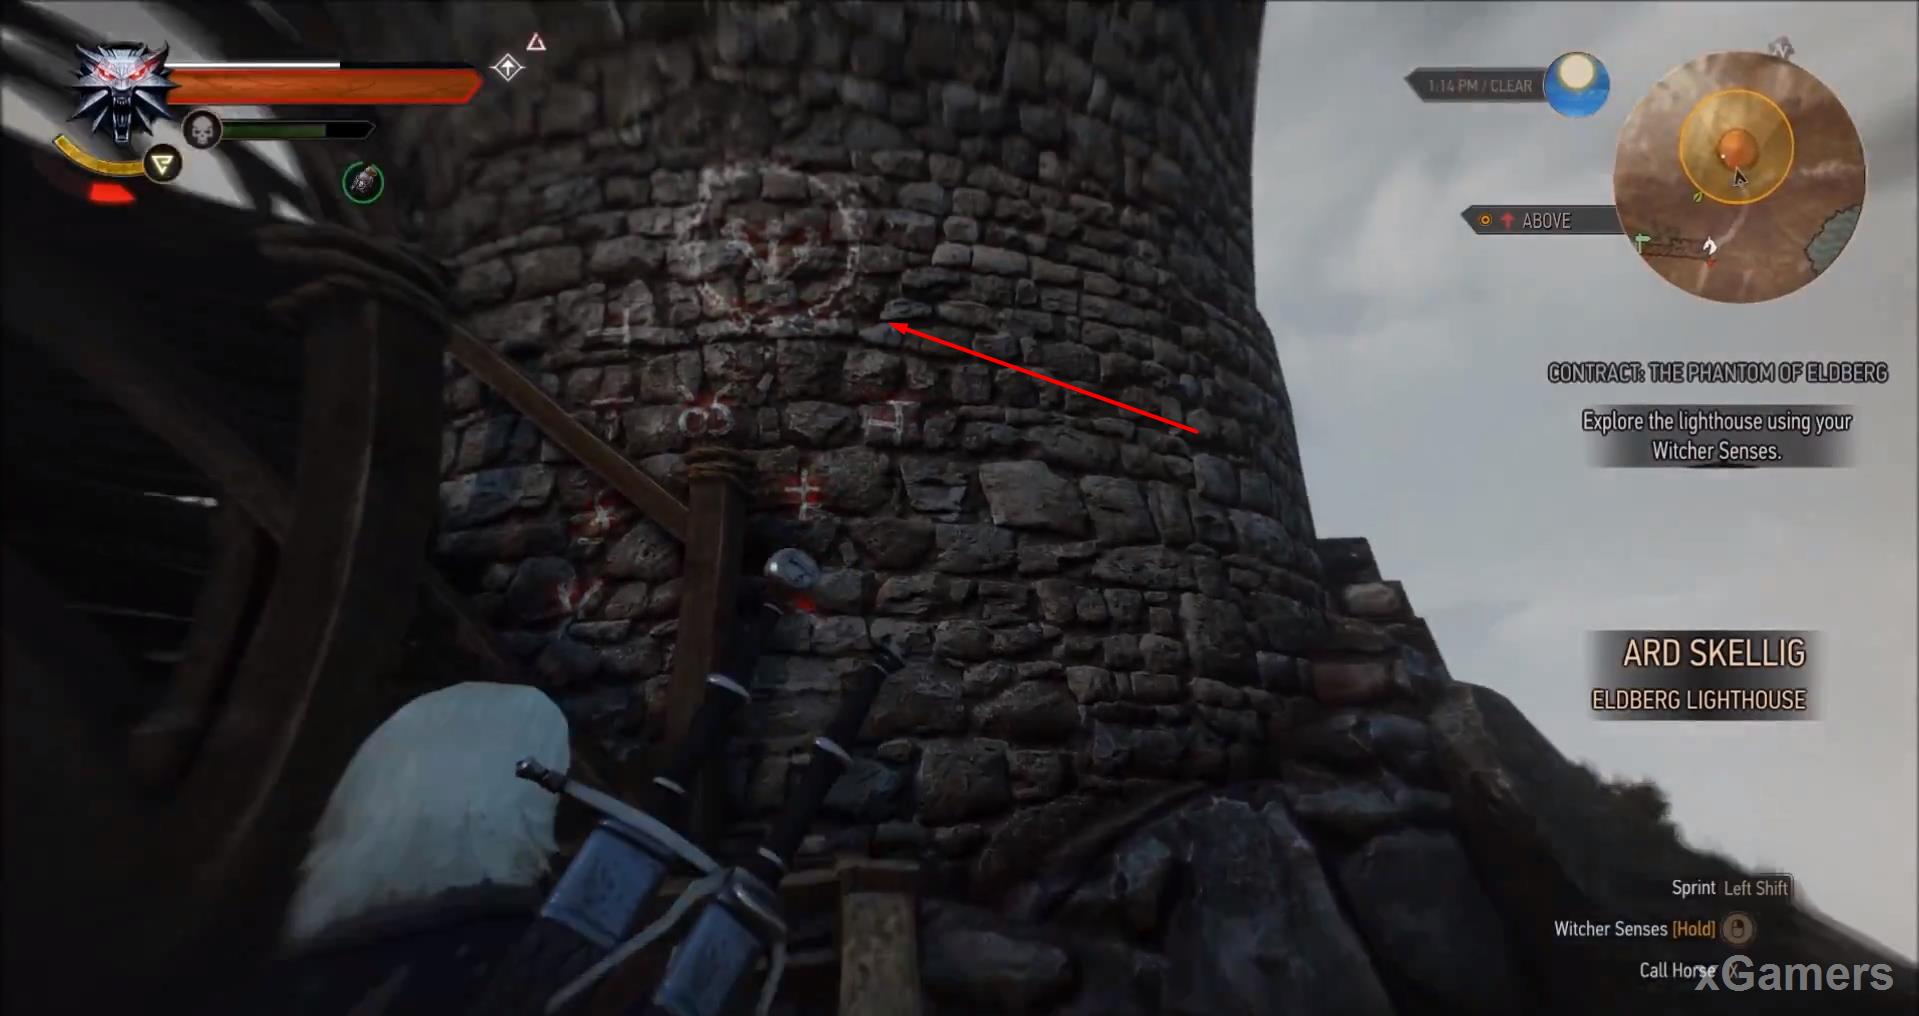 Geralt discovered symbol, writings directly indicate that the unusual Ghost